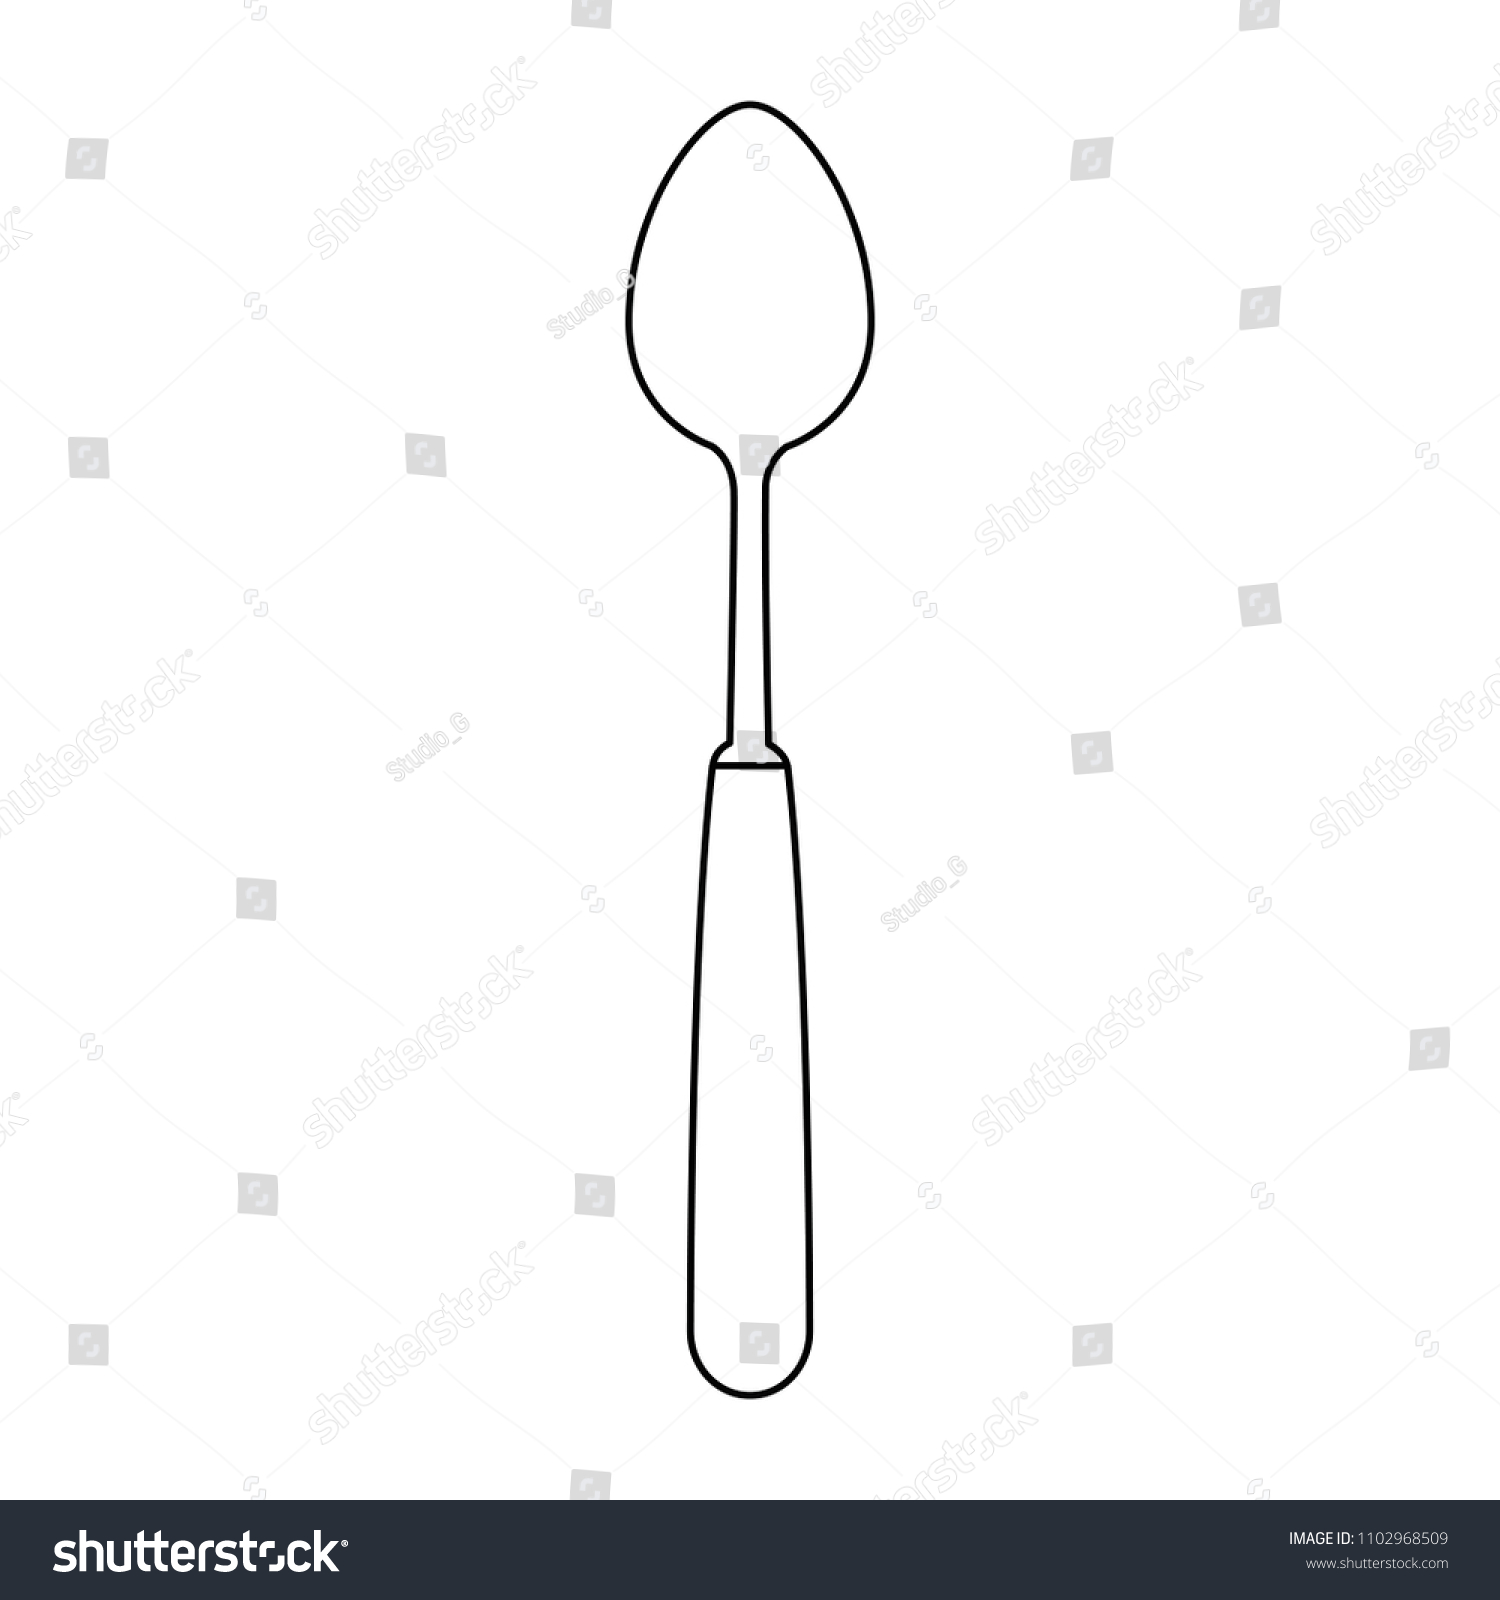 spoon cutlery tool icon #1102968509